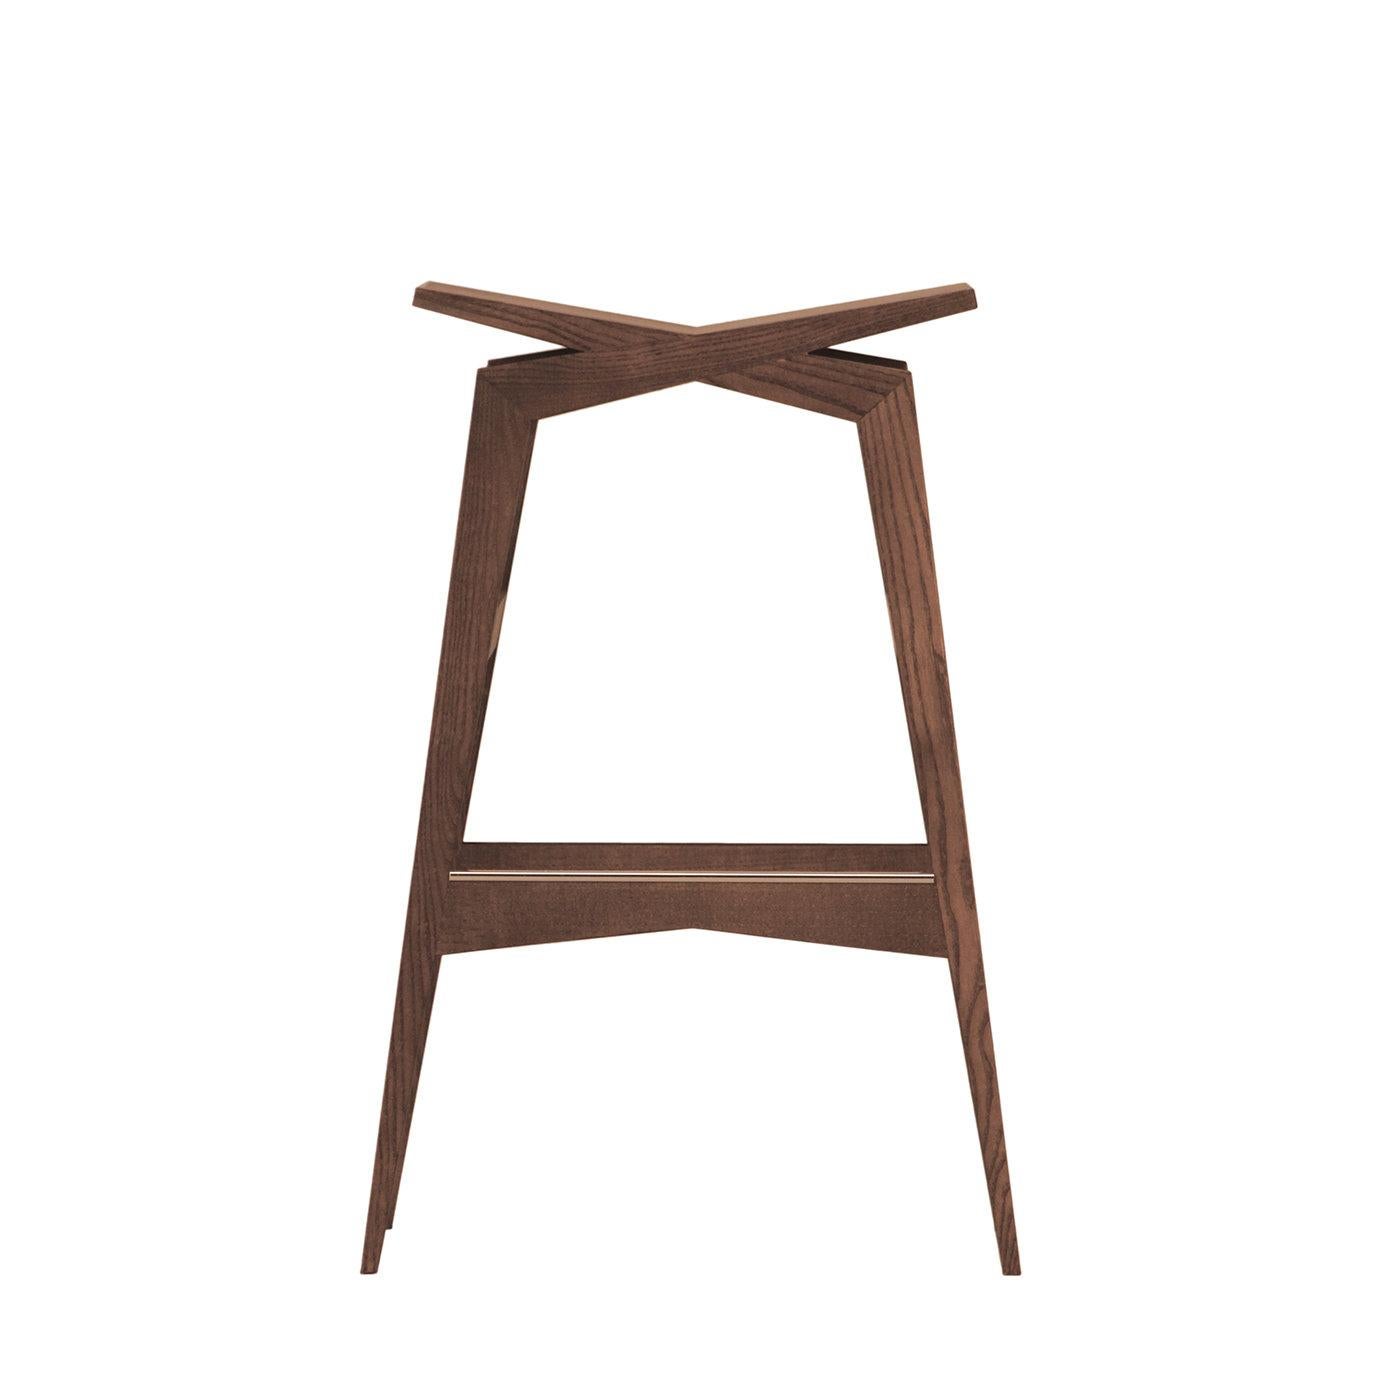 A celebration of pure geometric lines shaped out of top-quality ash marks the exclusive design of this stool. Its four tapered legs are linked to one another by means of sturdy stretchers, two of which serve as footrests. Maximum comfort is ensured